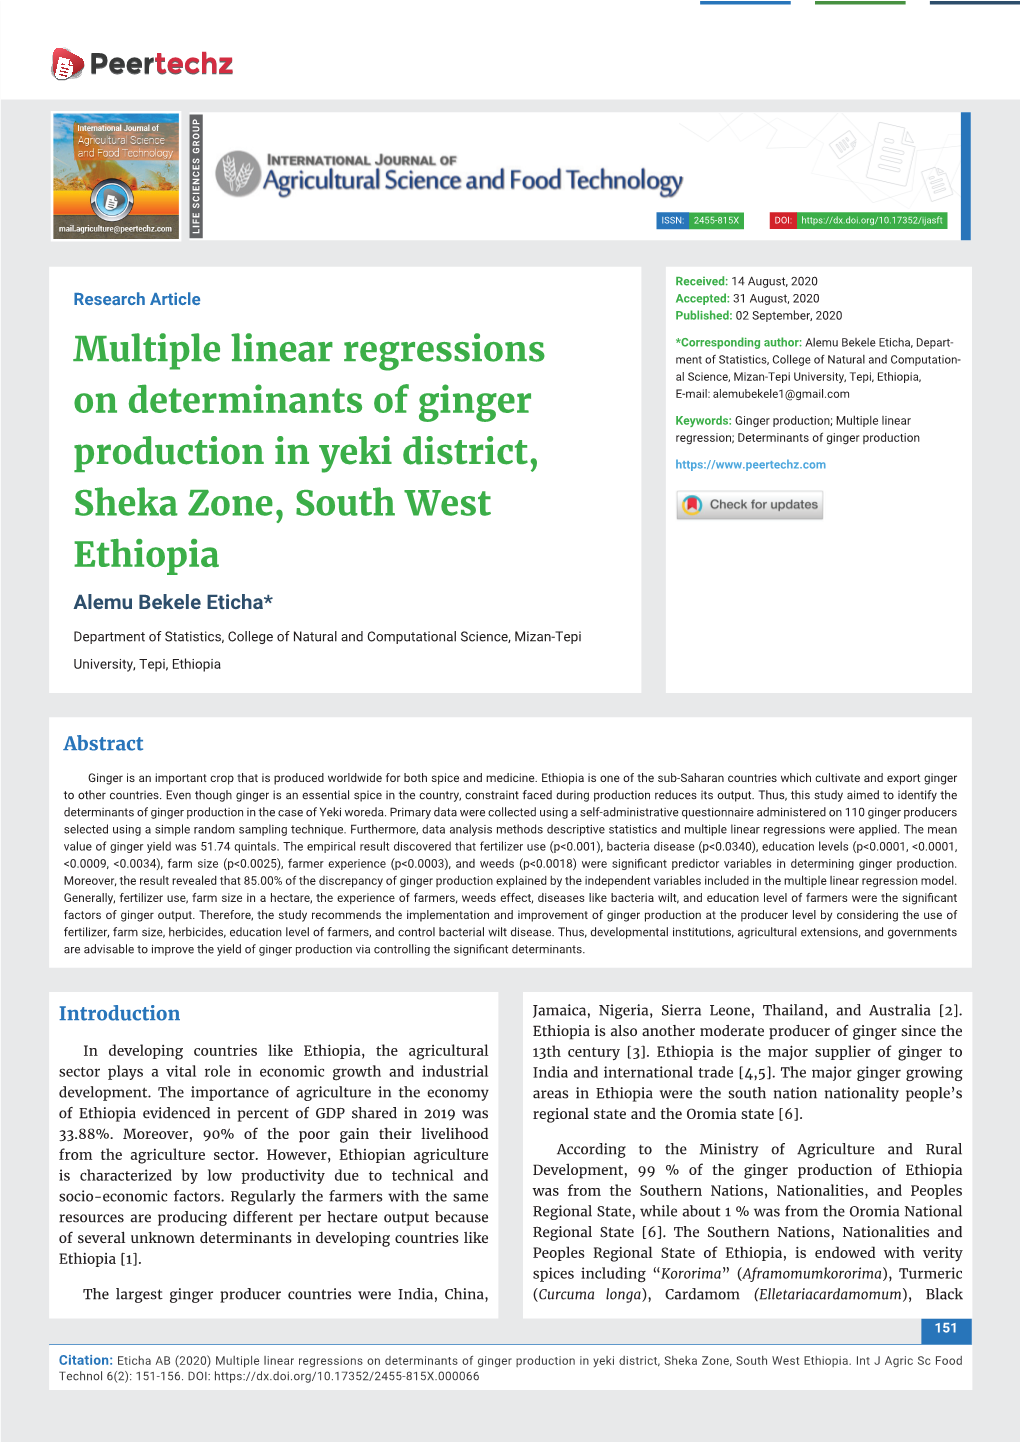 Multiple Linear Regressions on Determinants of Ginger Production in Yeki District, Sheka Zone, South West Ethiopia